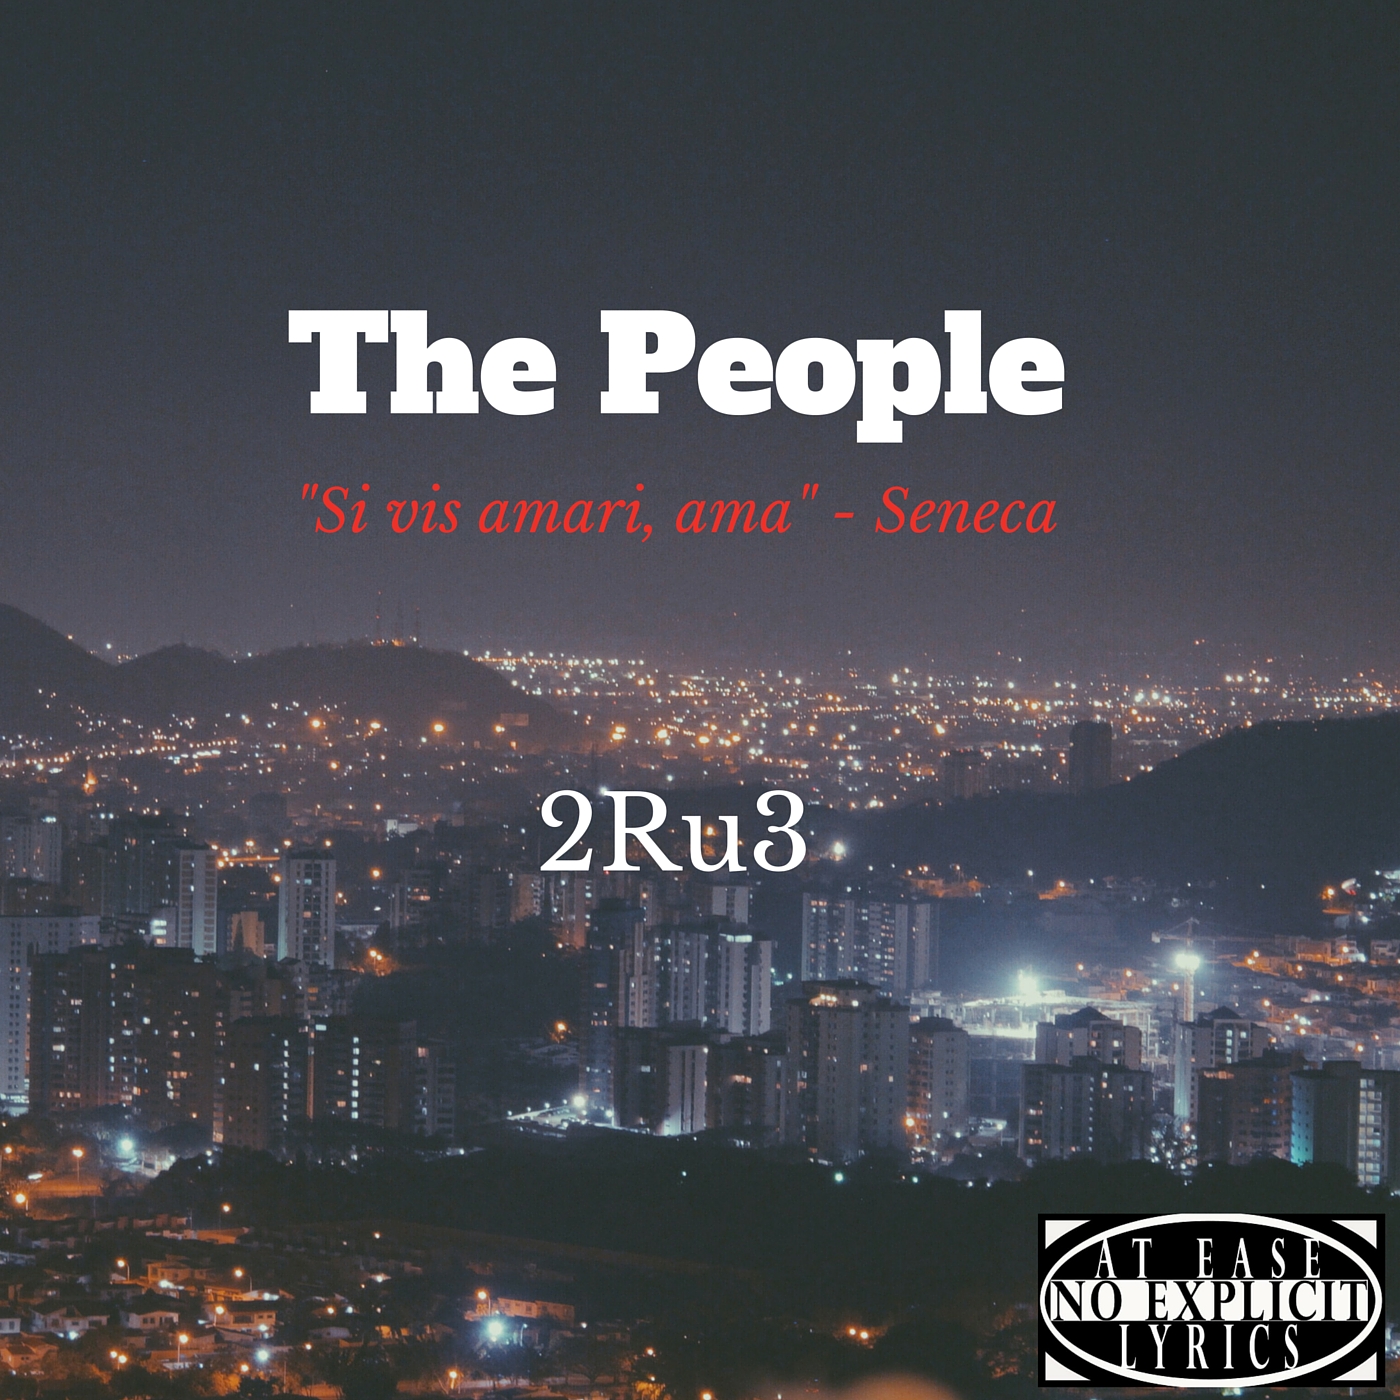 Cover art for 2Ru3's November 2015 single "The People"